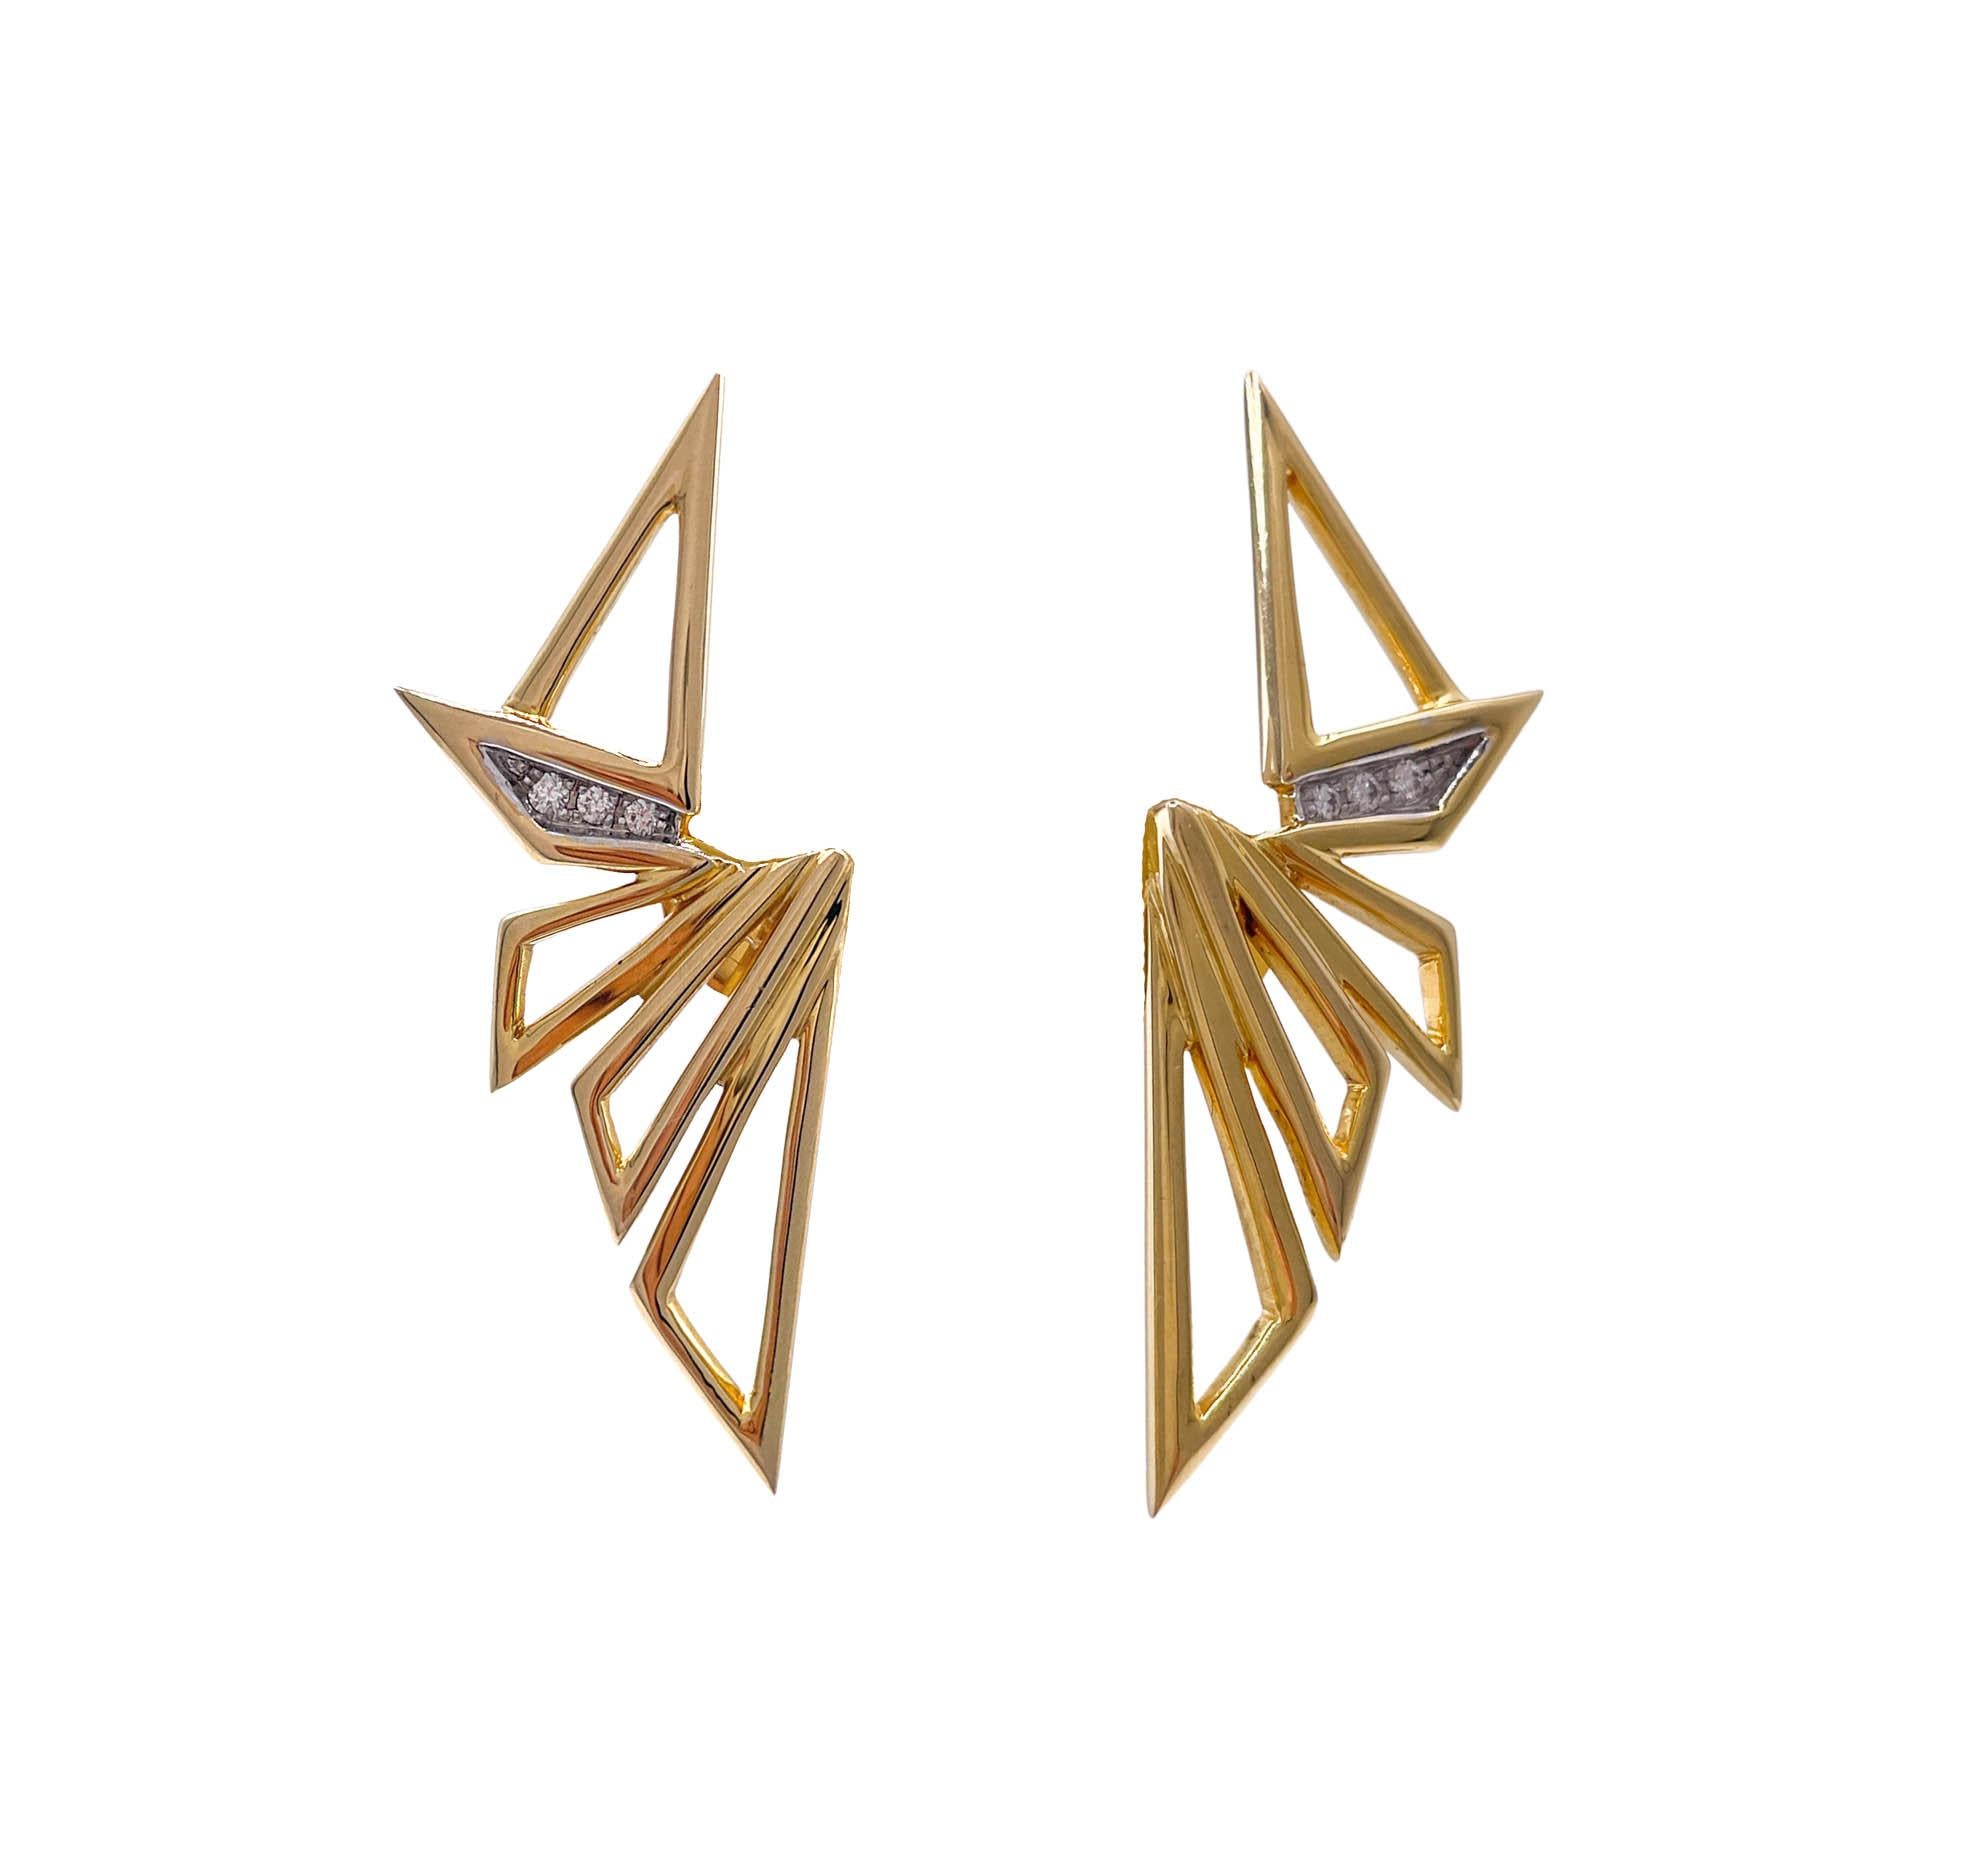 Kavant & Sharart 18k Yellow Gold Diamond Origami Earrings In Good Condition For Sale In Boca Raton, FL